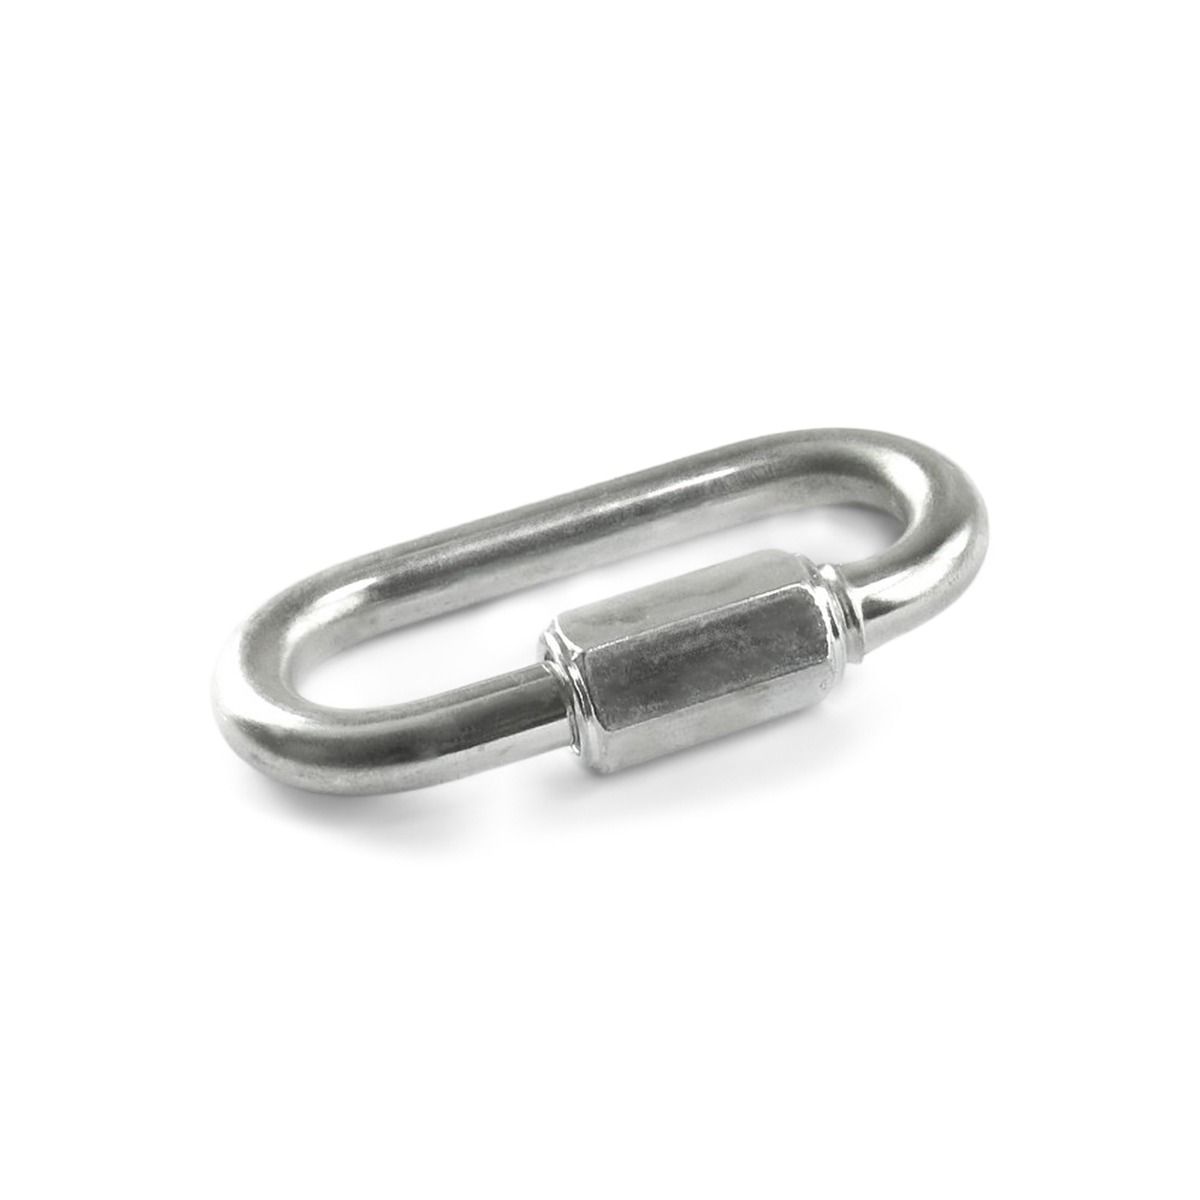 5/16" Quick Link Zinc Plated by ENKAY 1